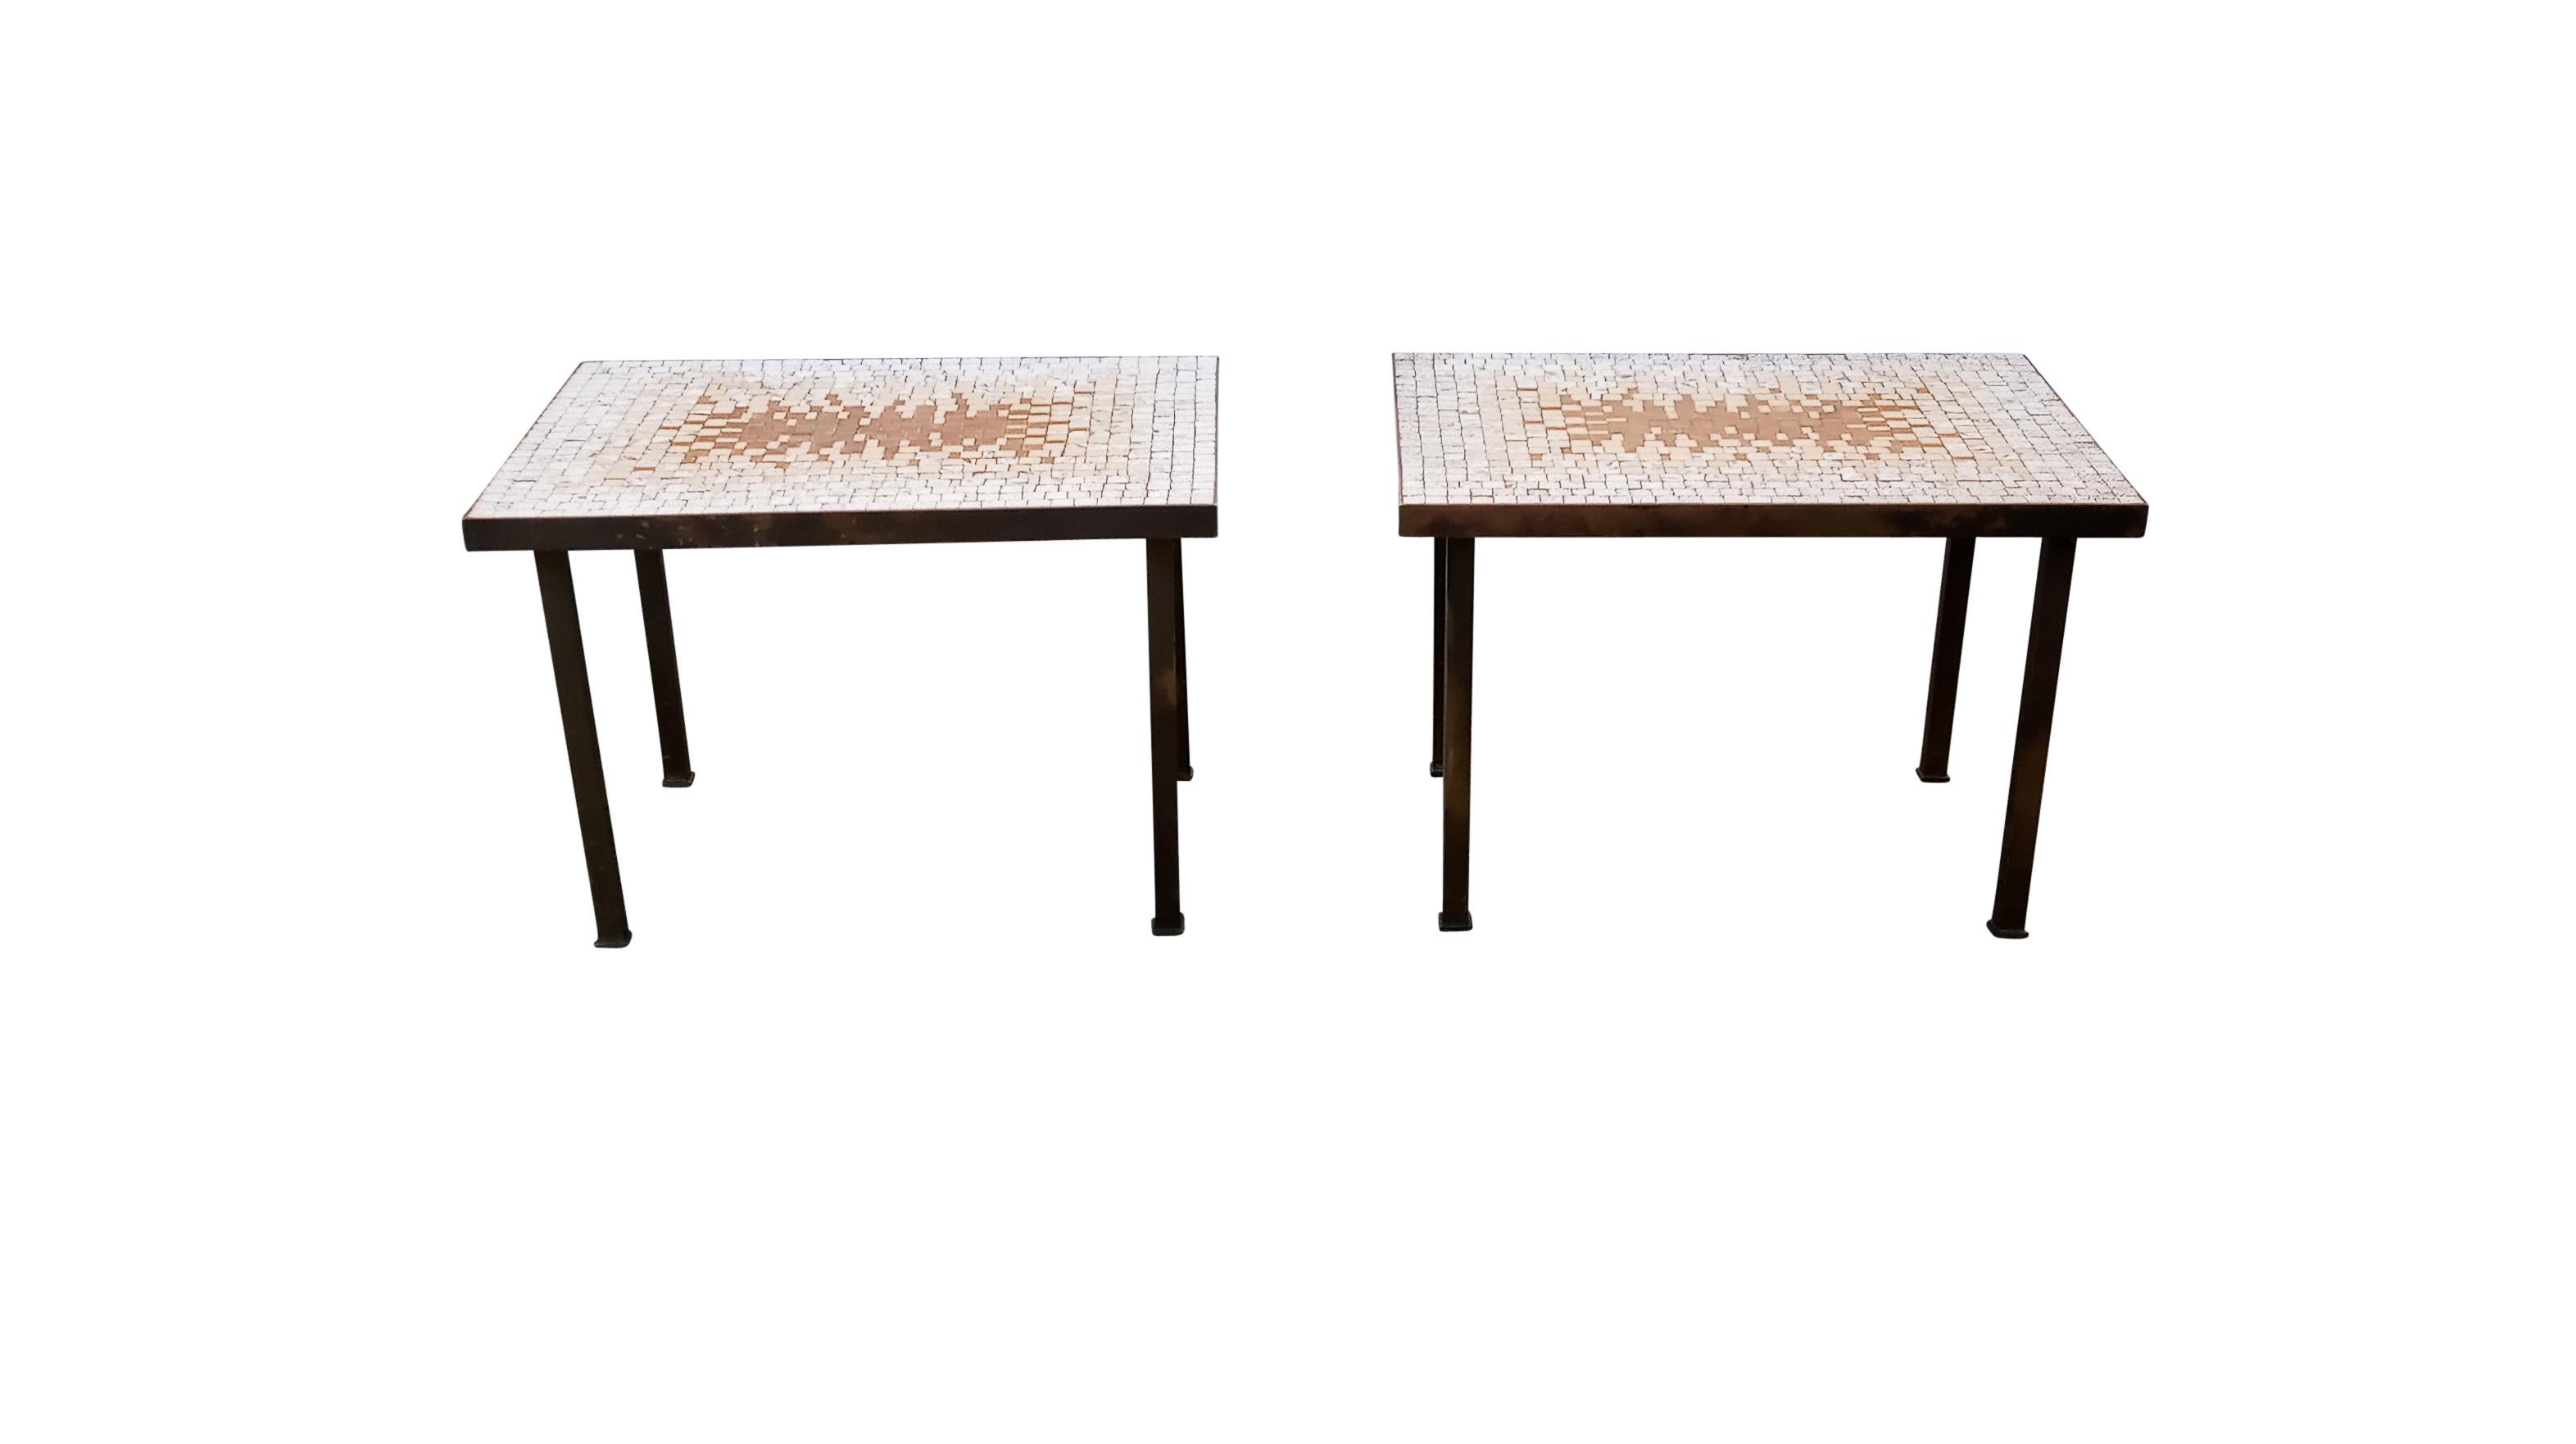 In the style of Gordon & Marshall Martz, Edward Wormley, or Samson Berman, this pair of truly vintage side tables is sure to be a crowd-pleaser. The tops have an elaborate and beautiful sunburst pattern of handplaced ceramic tiles trimmed in aged